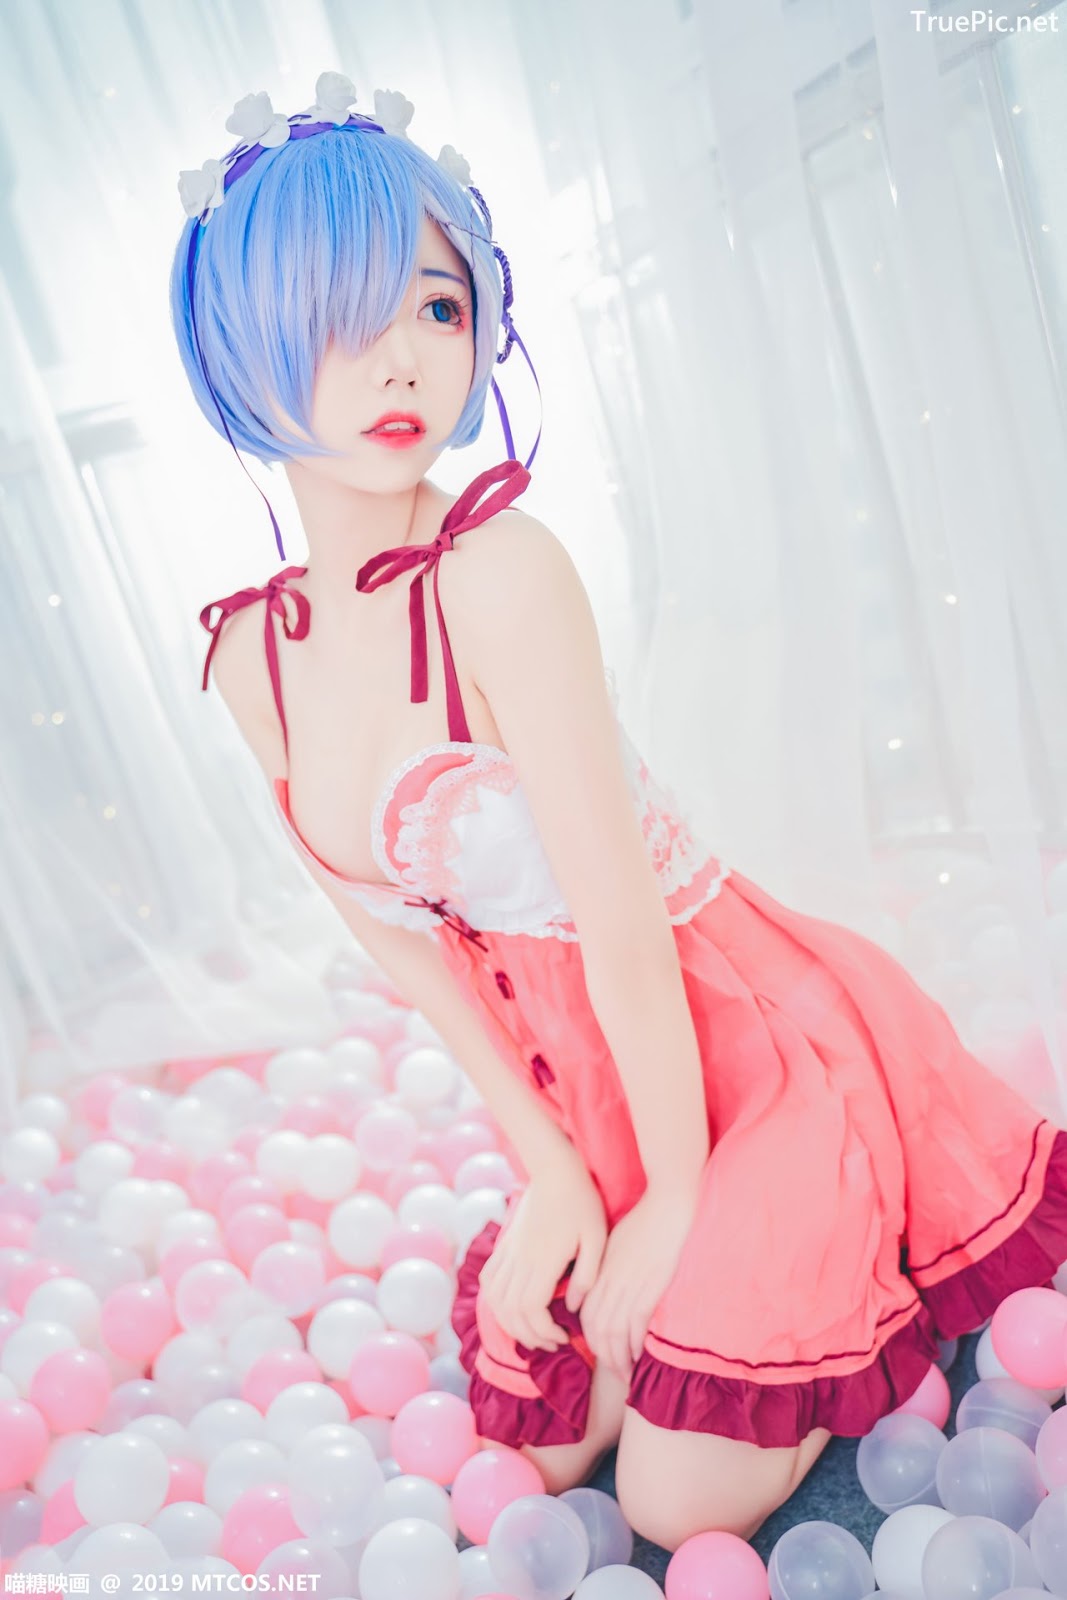 Image [MTCos] 喵糖映画 Vol.018 – Chinese Cute Model – Beautiful Rem Cosplay - TruePic.net - Picture-1